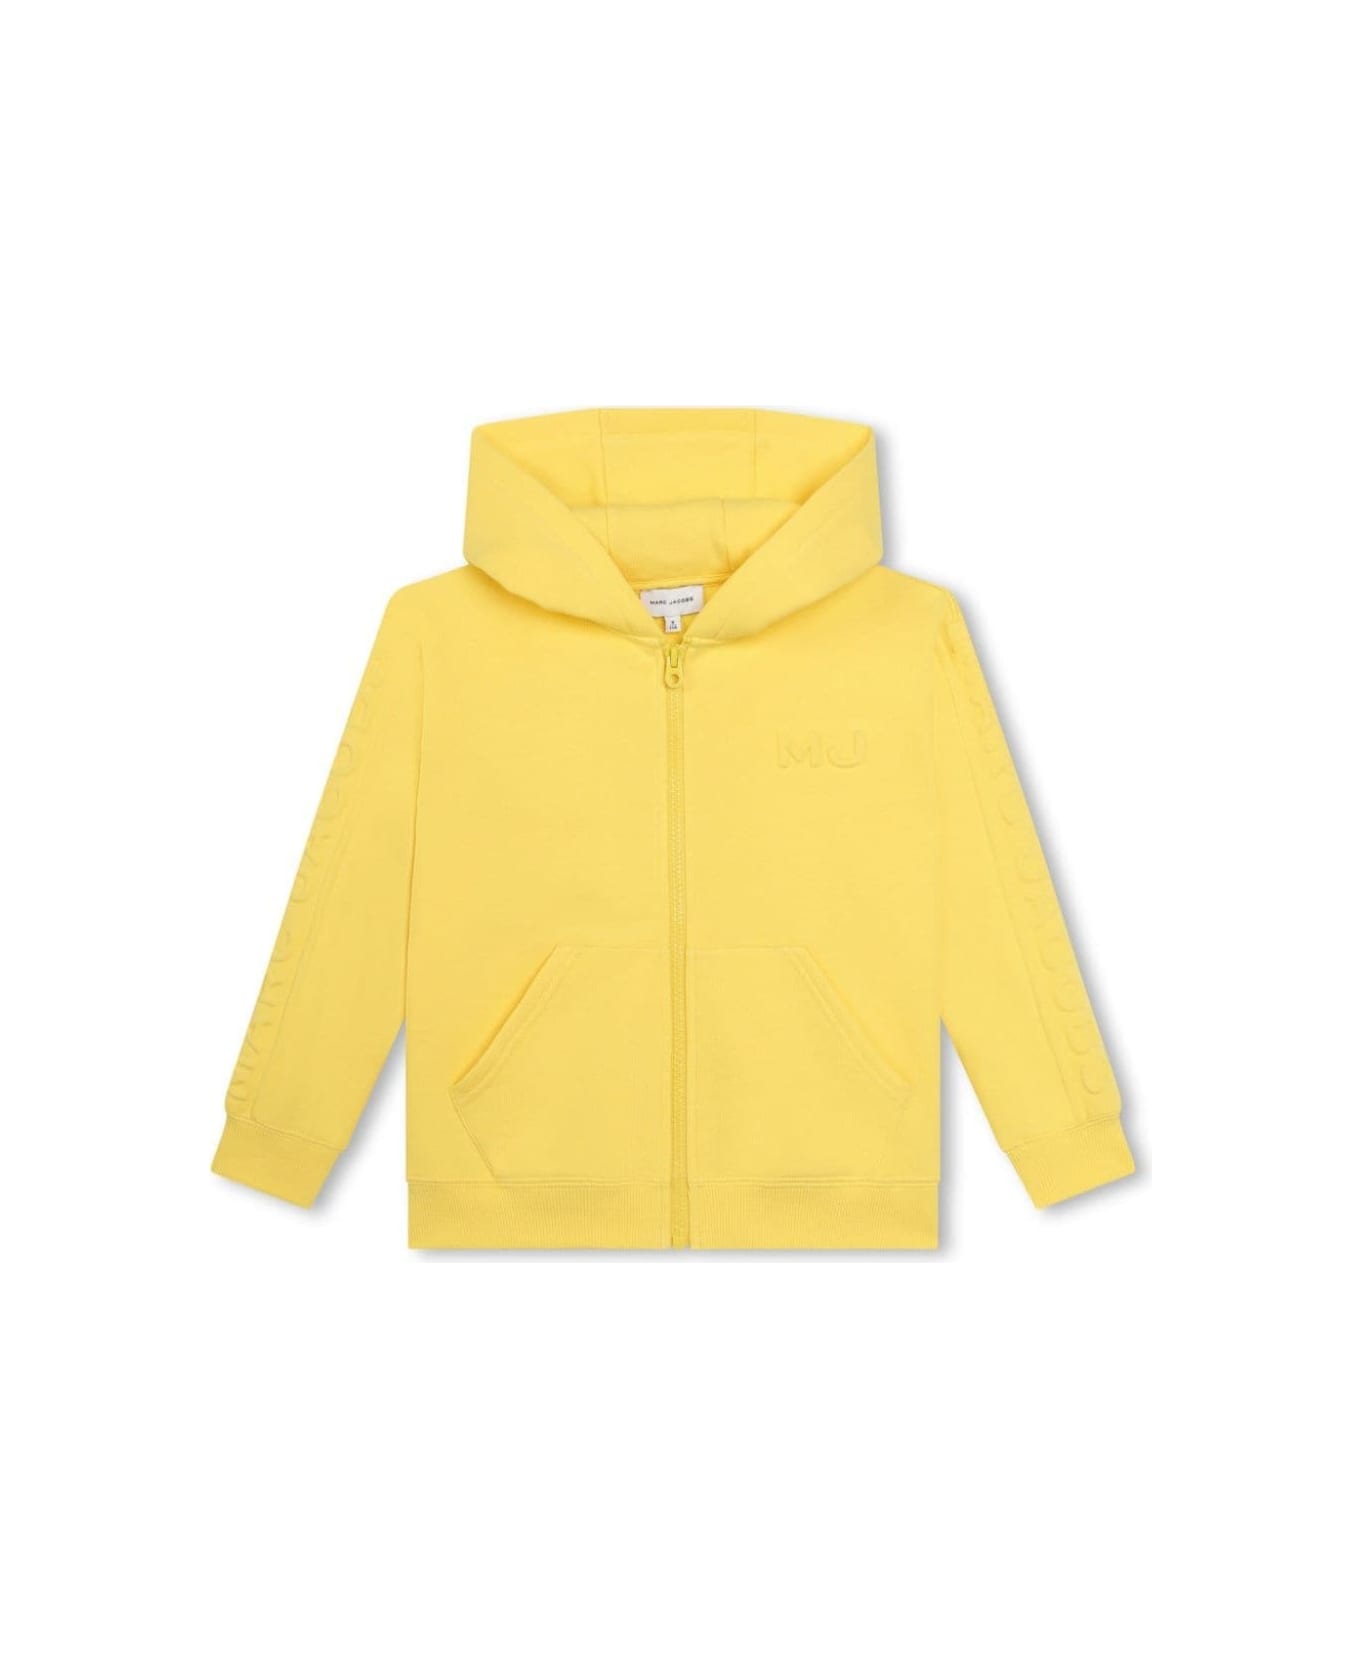 Marc Jacobs Yellow Hoodie With Zip Closure In Cotton Boy - Yellow